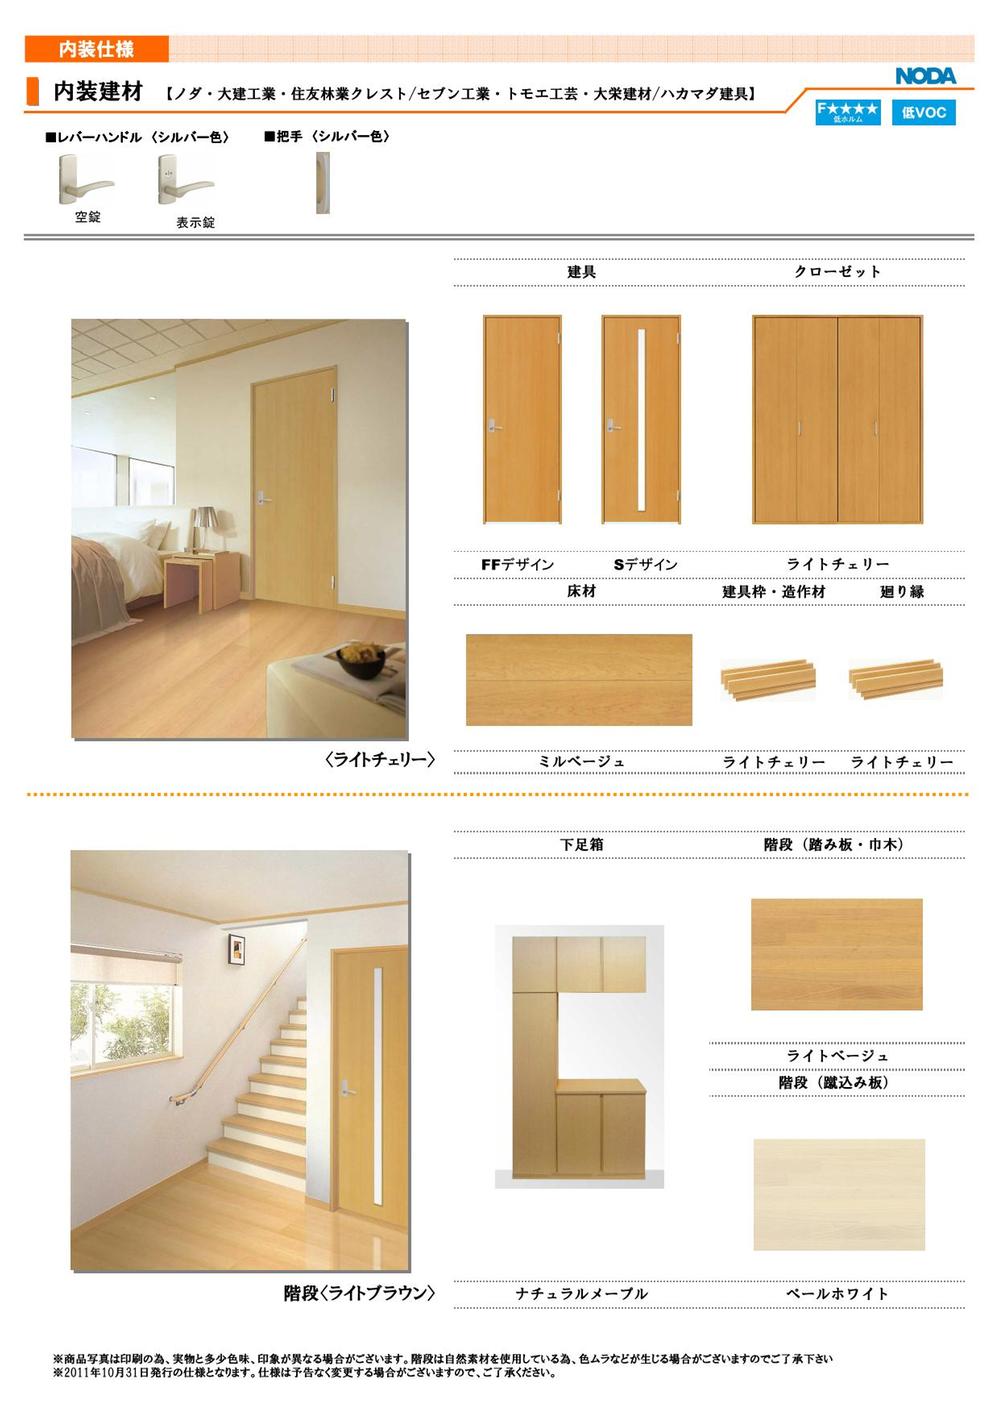 Construction ・ Construction method ・ specification. Room Natural shades. There will be a bright room. Building specifications brochure image